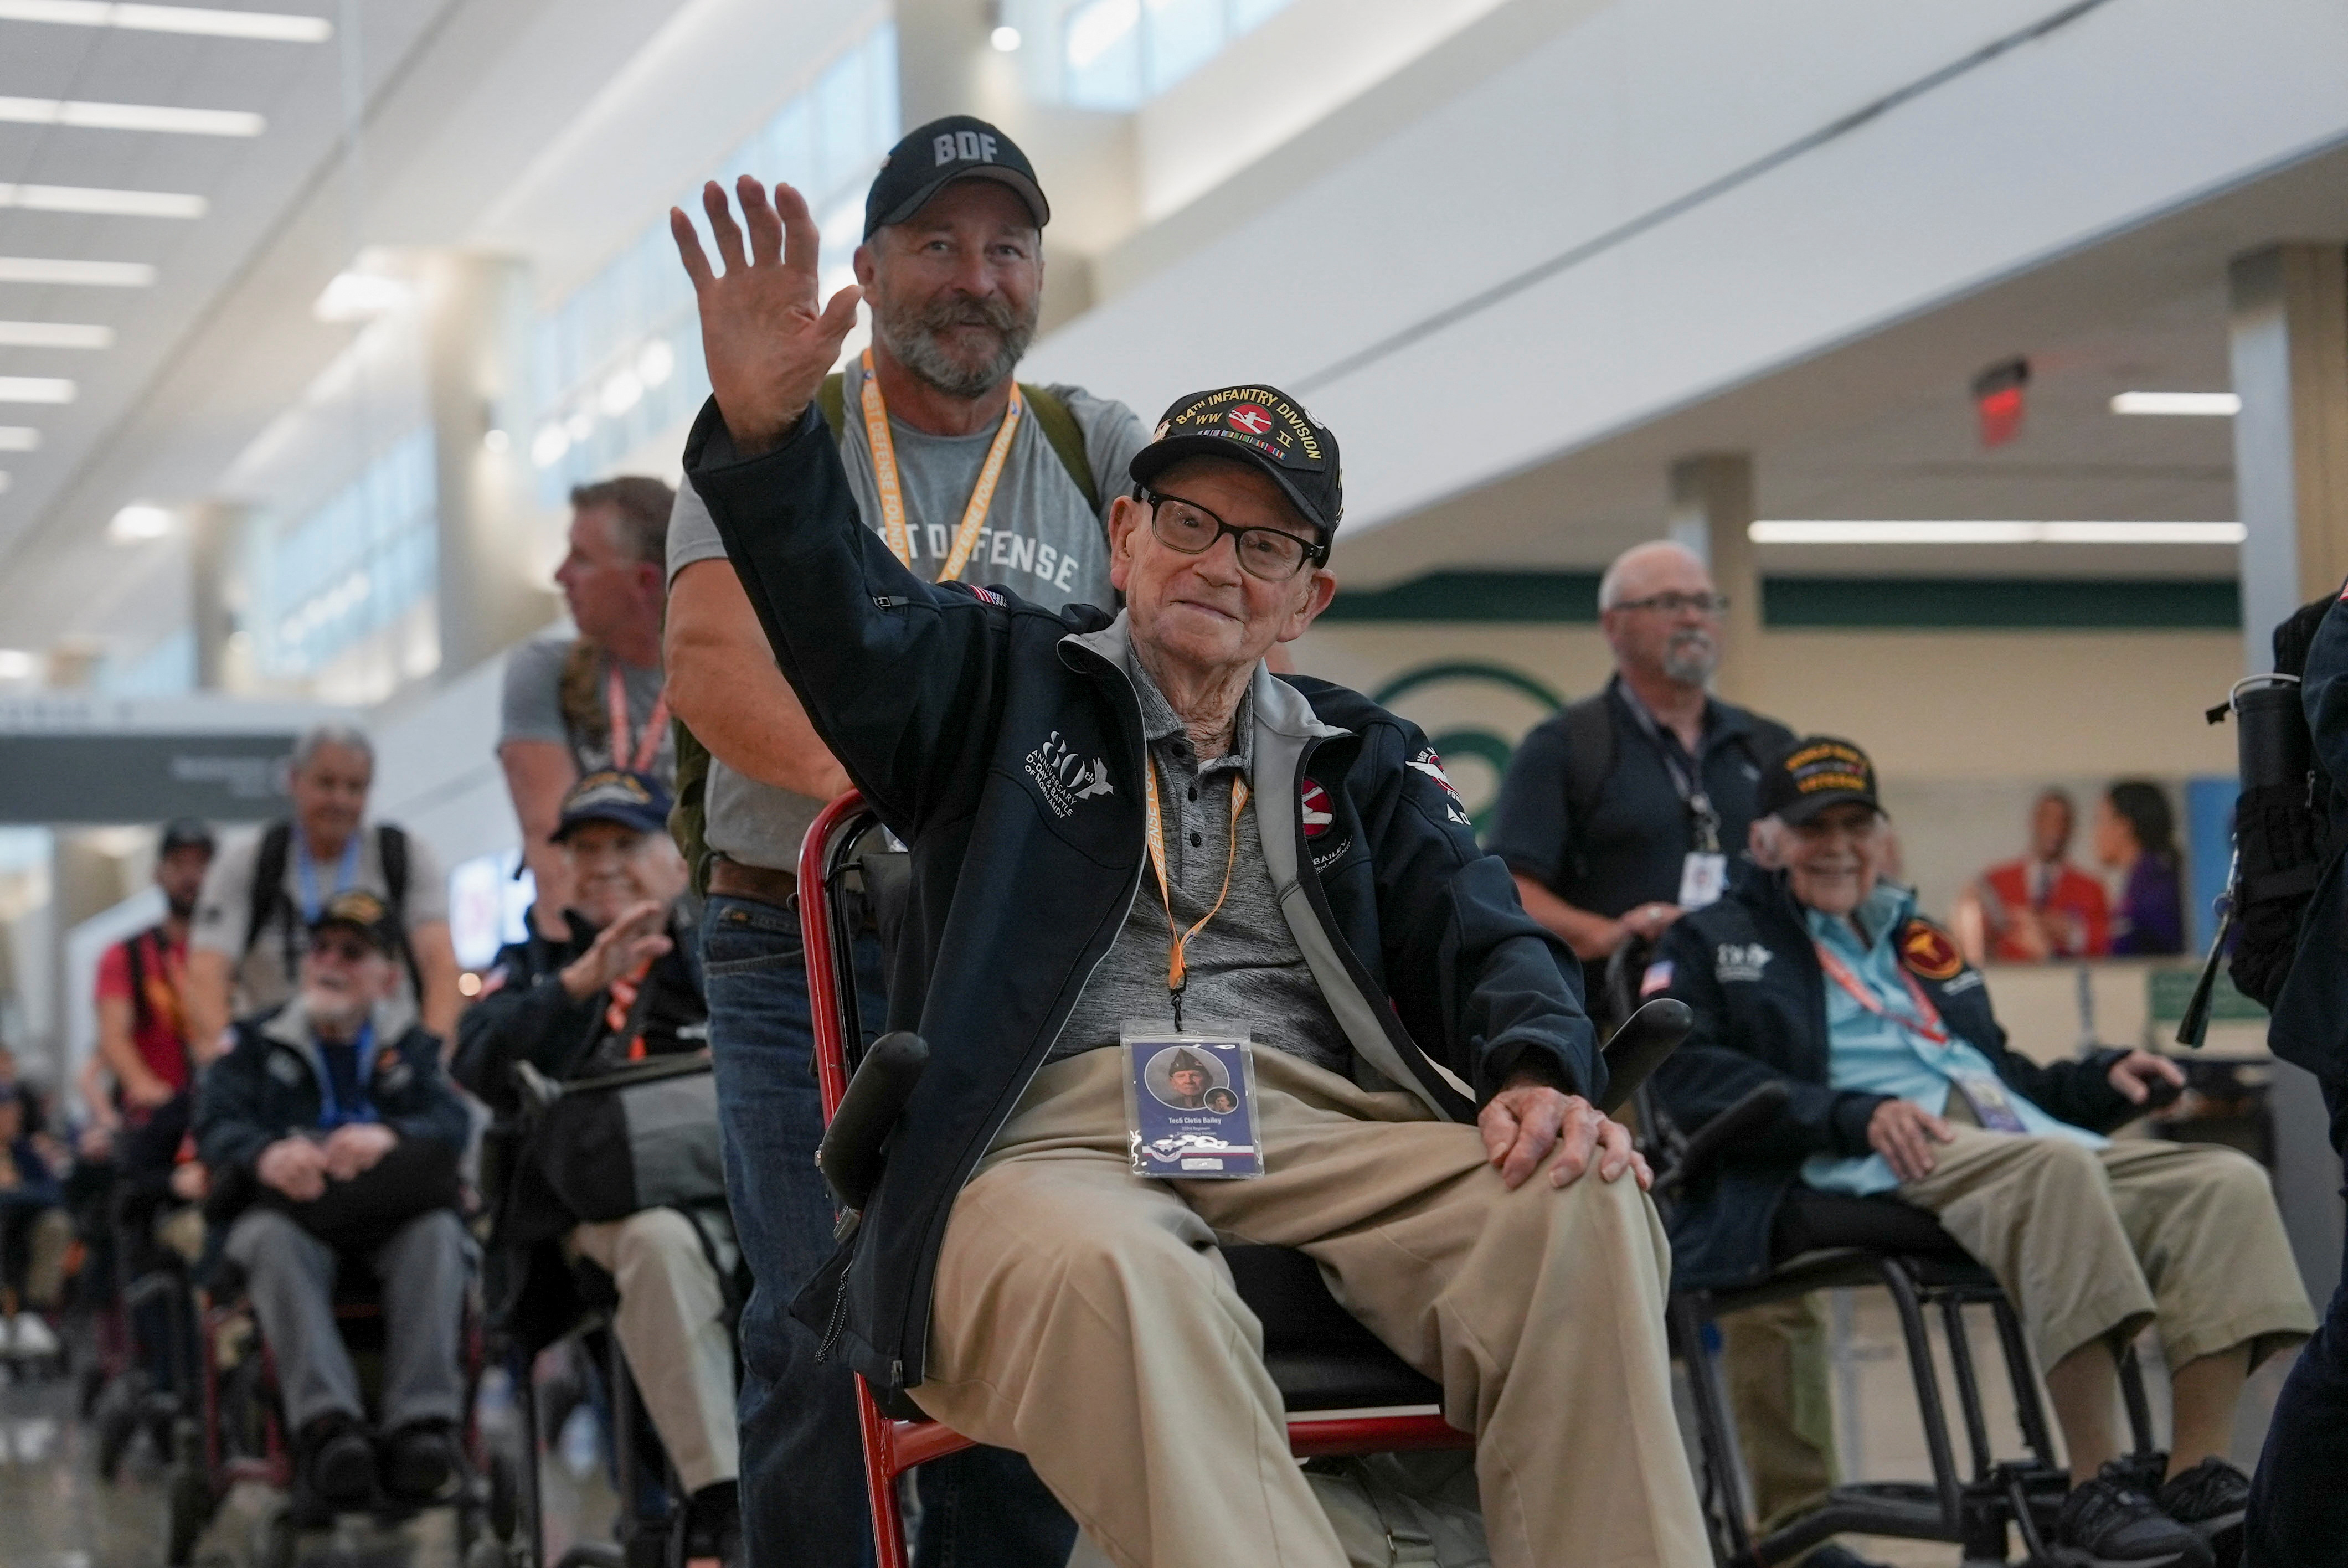 World War II Veterans prepare to travel to Normandy, France to commemorate D-Day